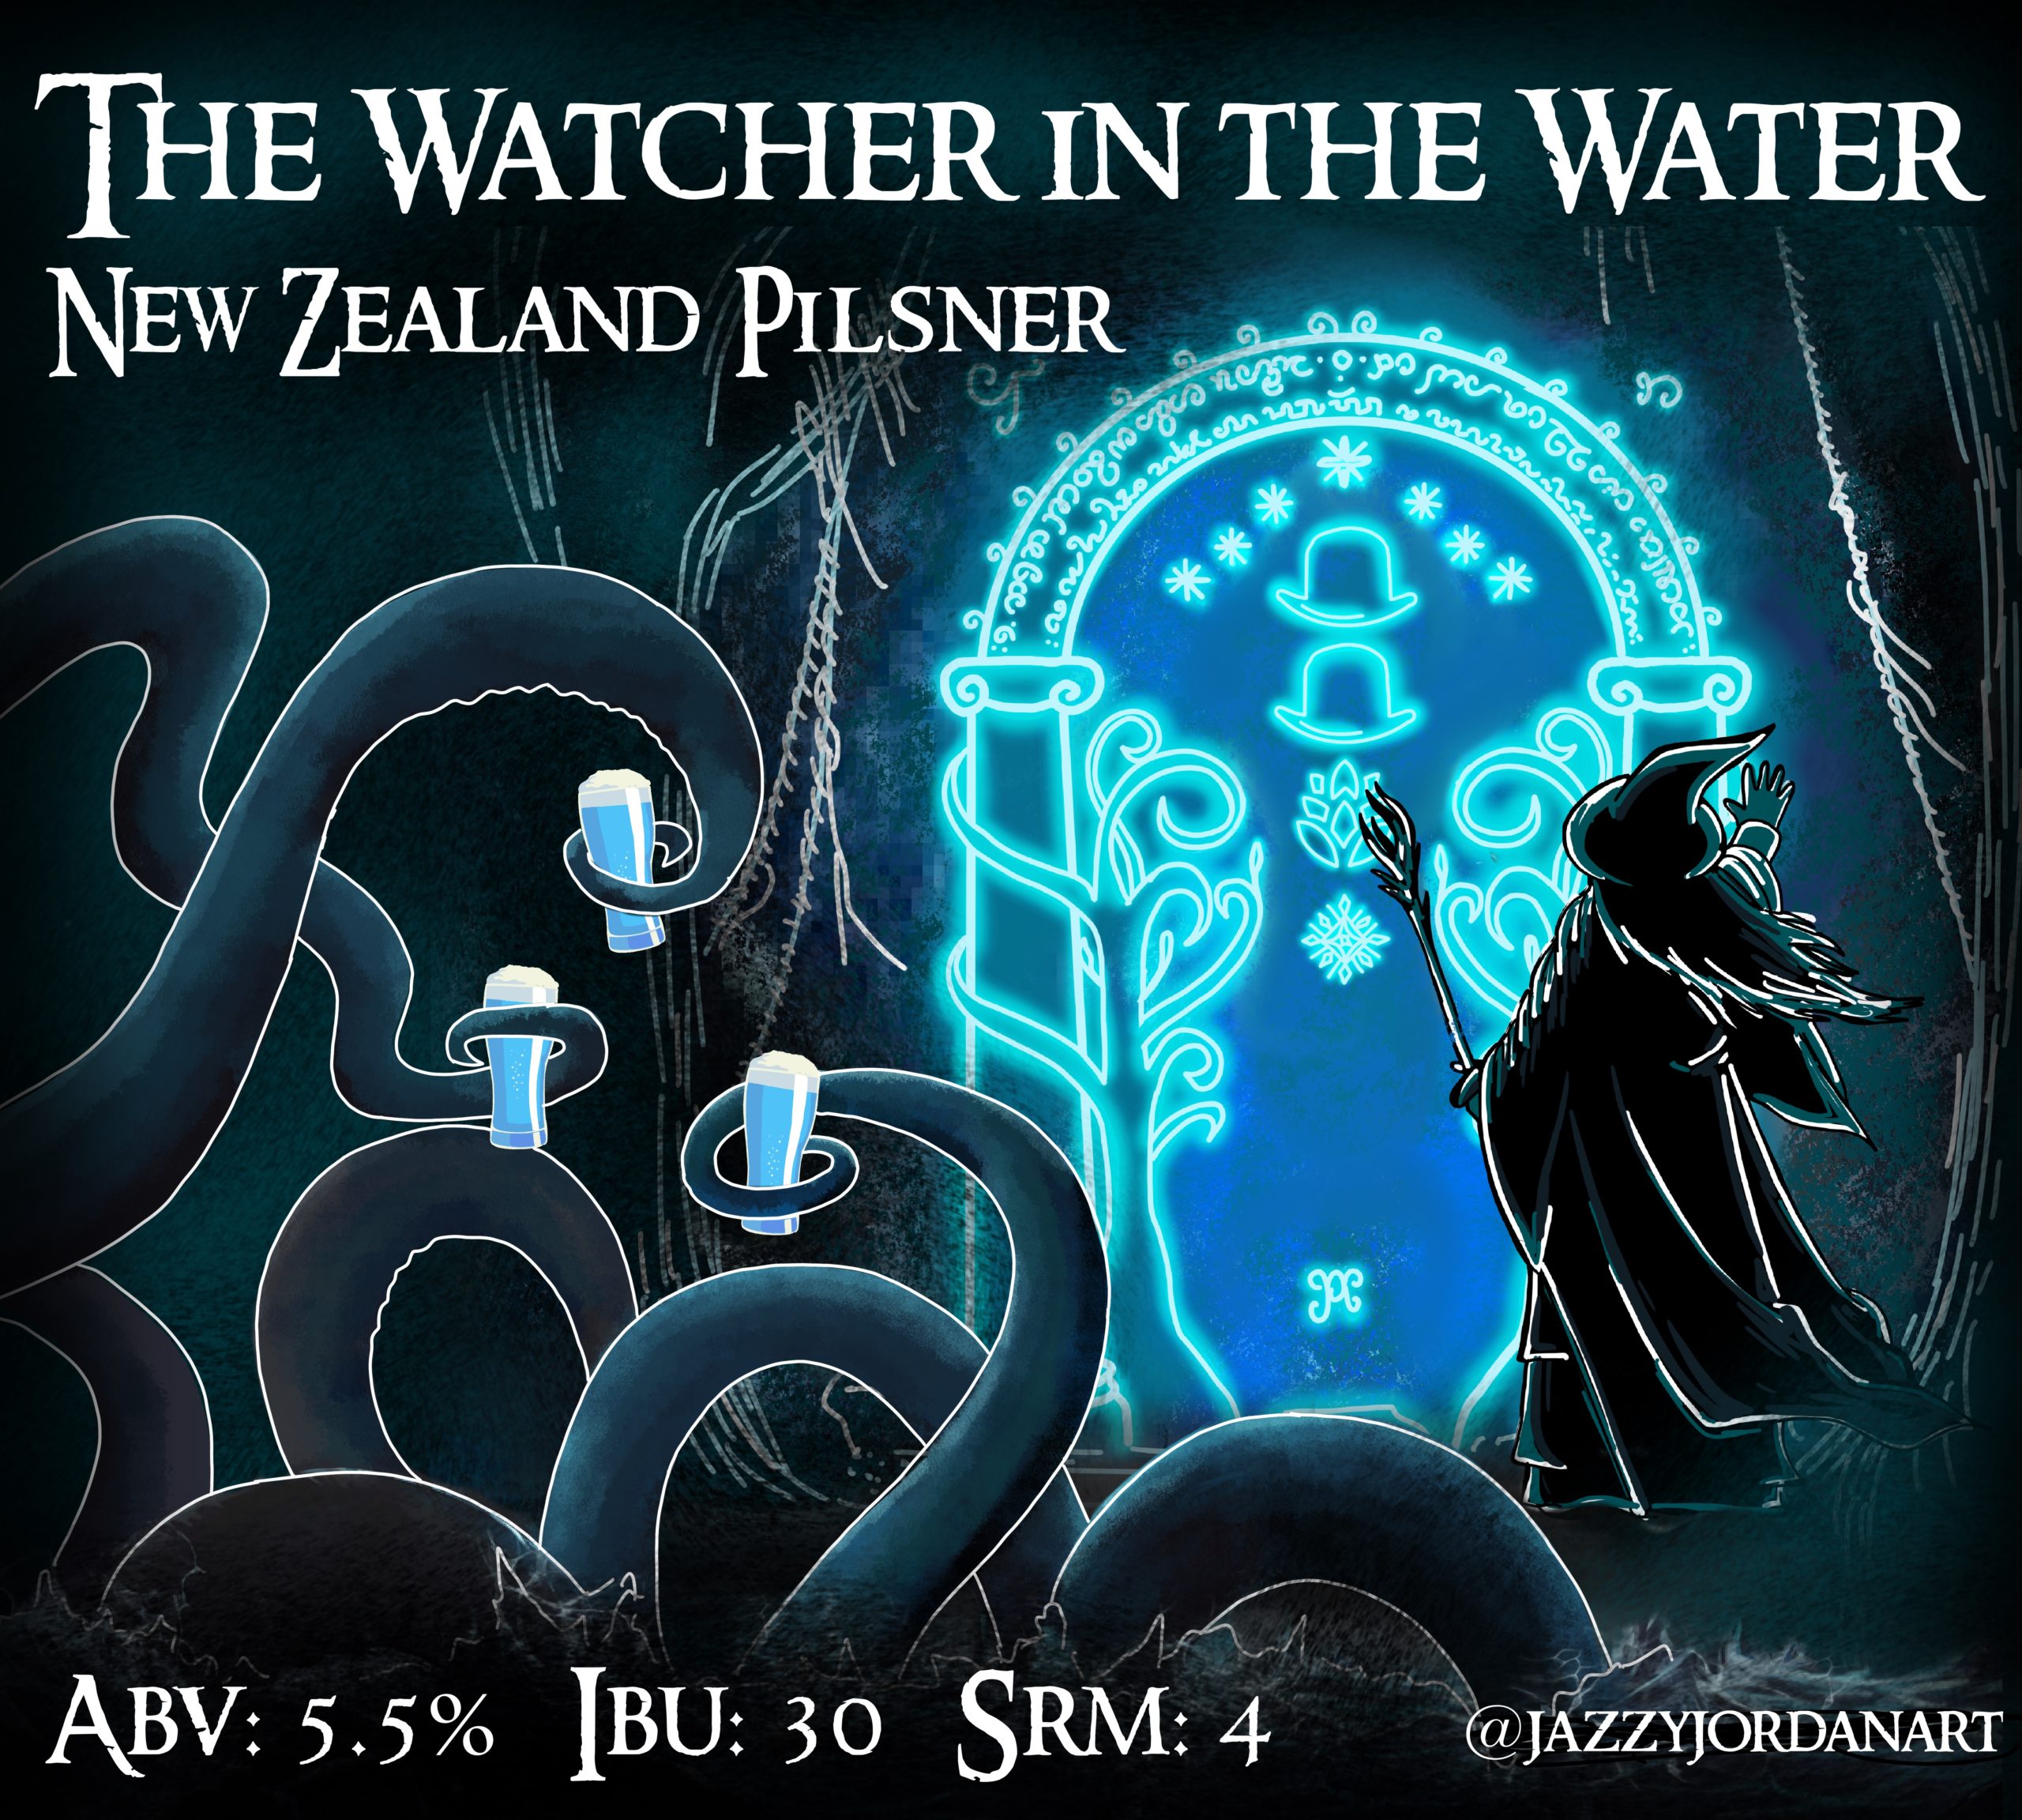 The Watcher in the Water